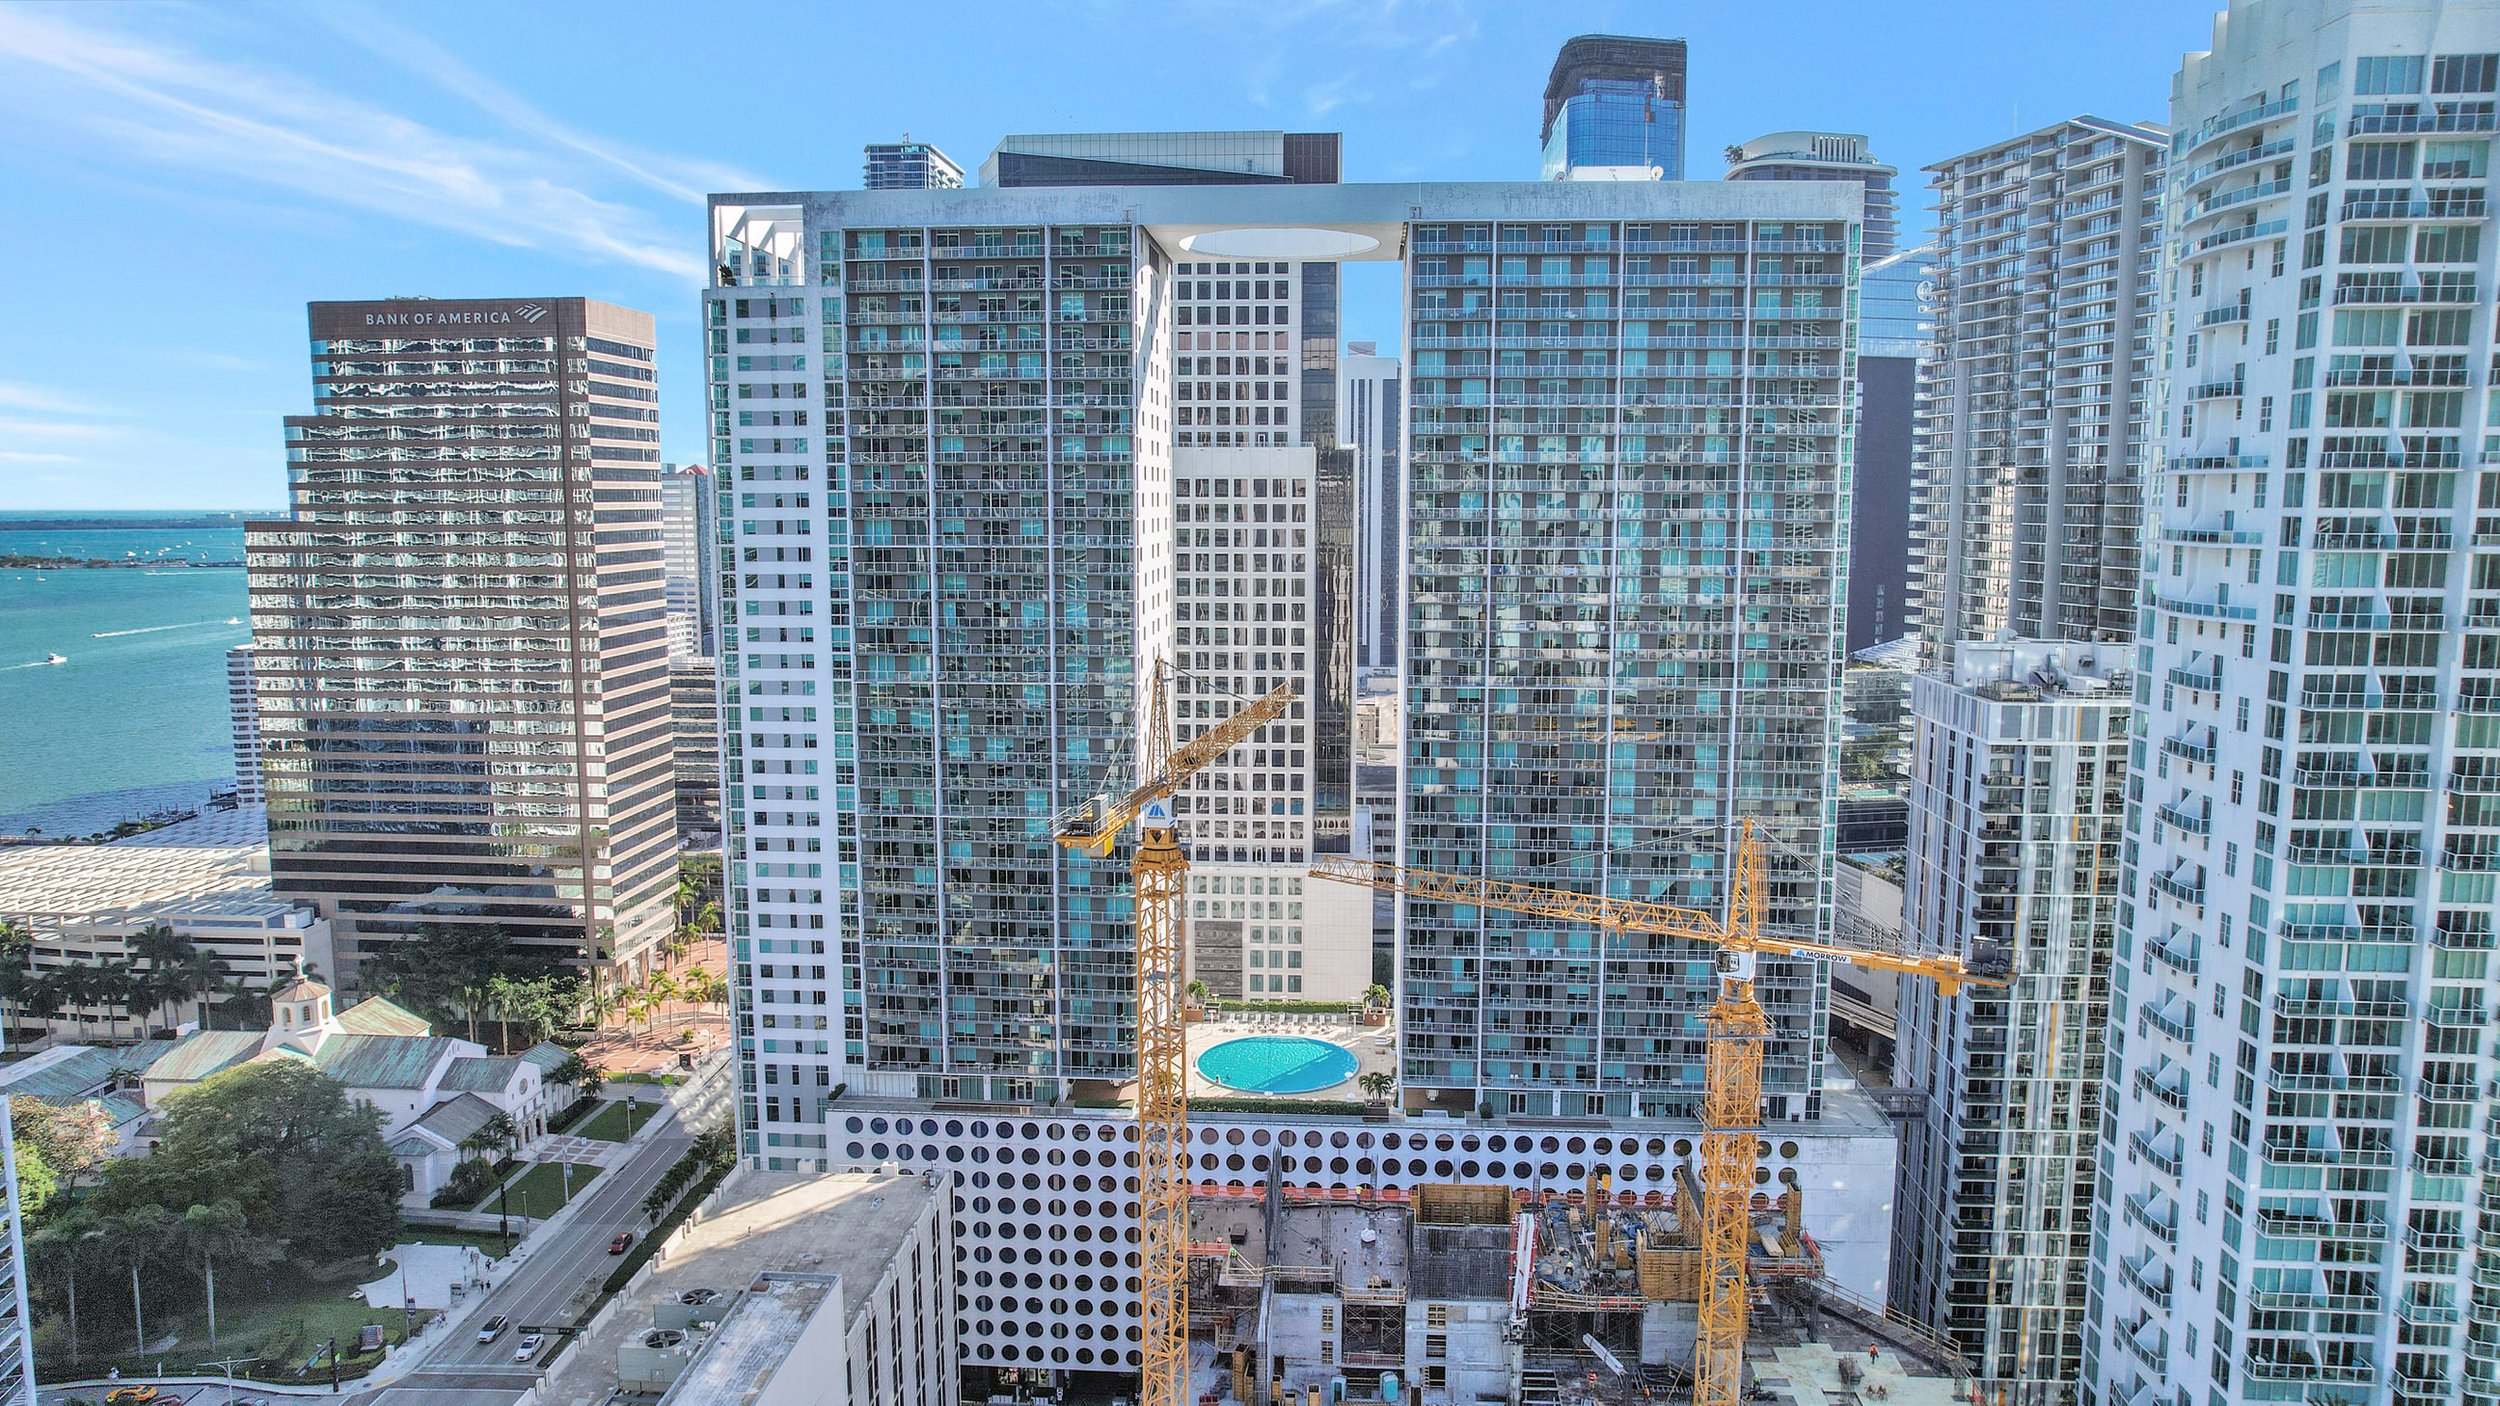 Check Out This Two-Bedroom Condo For Under $900K In Brickell 65.jpg